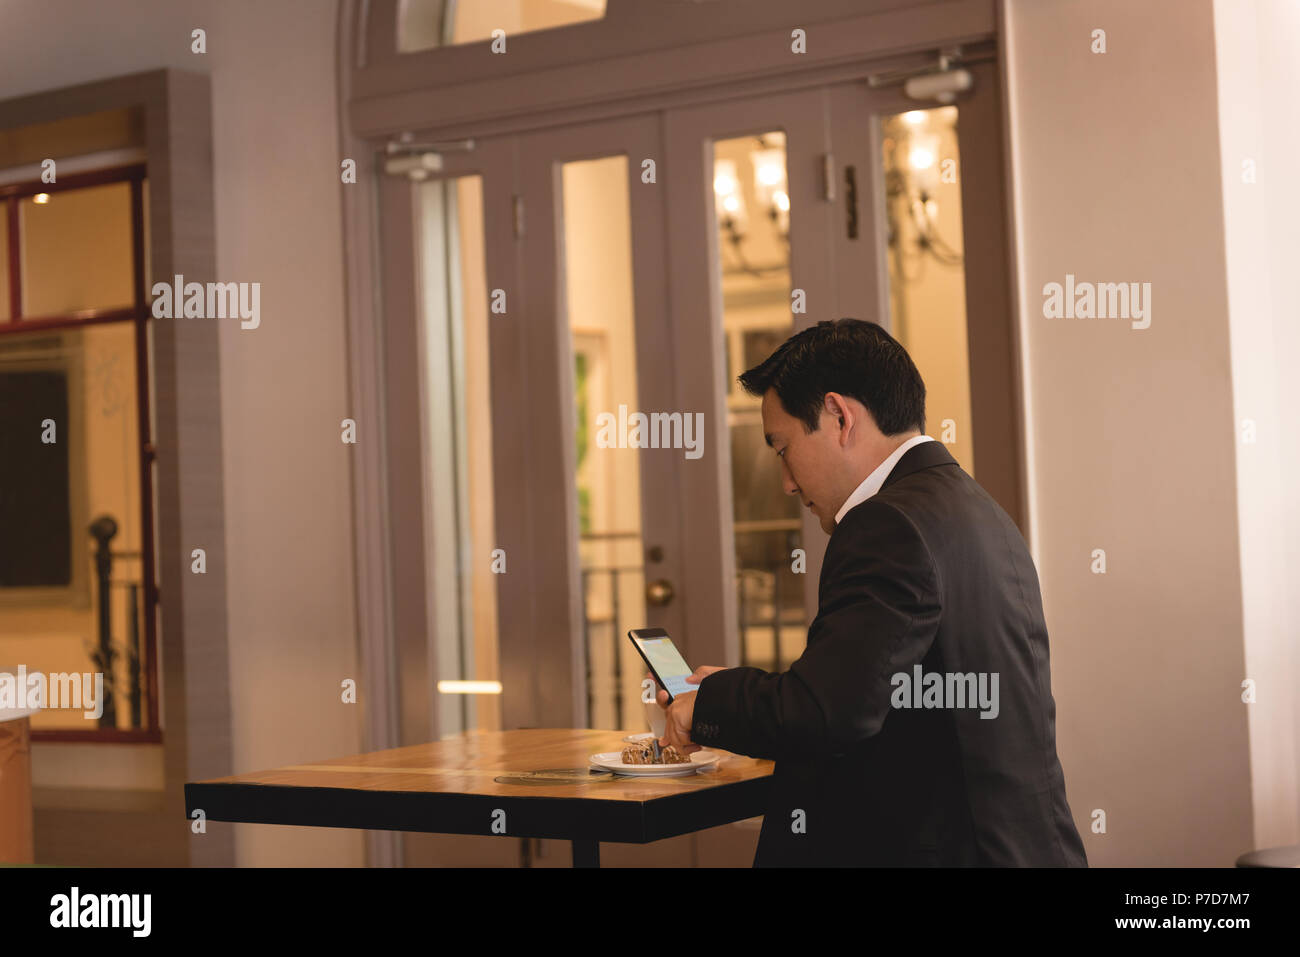 Businessman using mobile phone while having coffee Banque D'Images